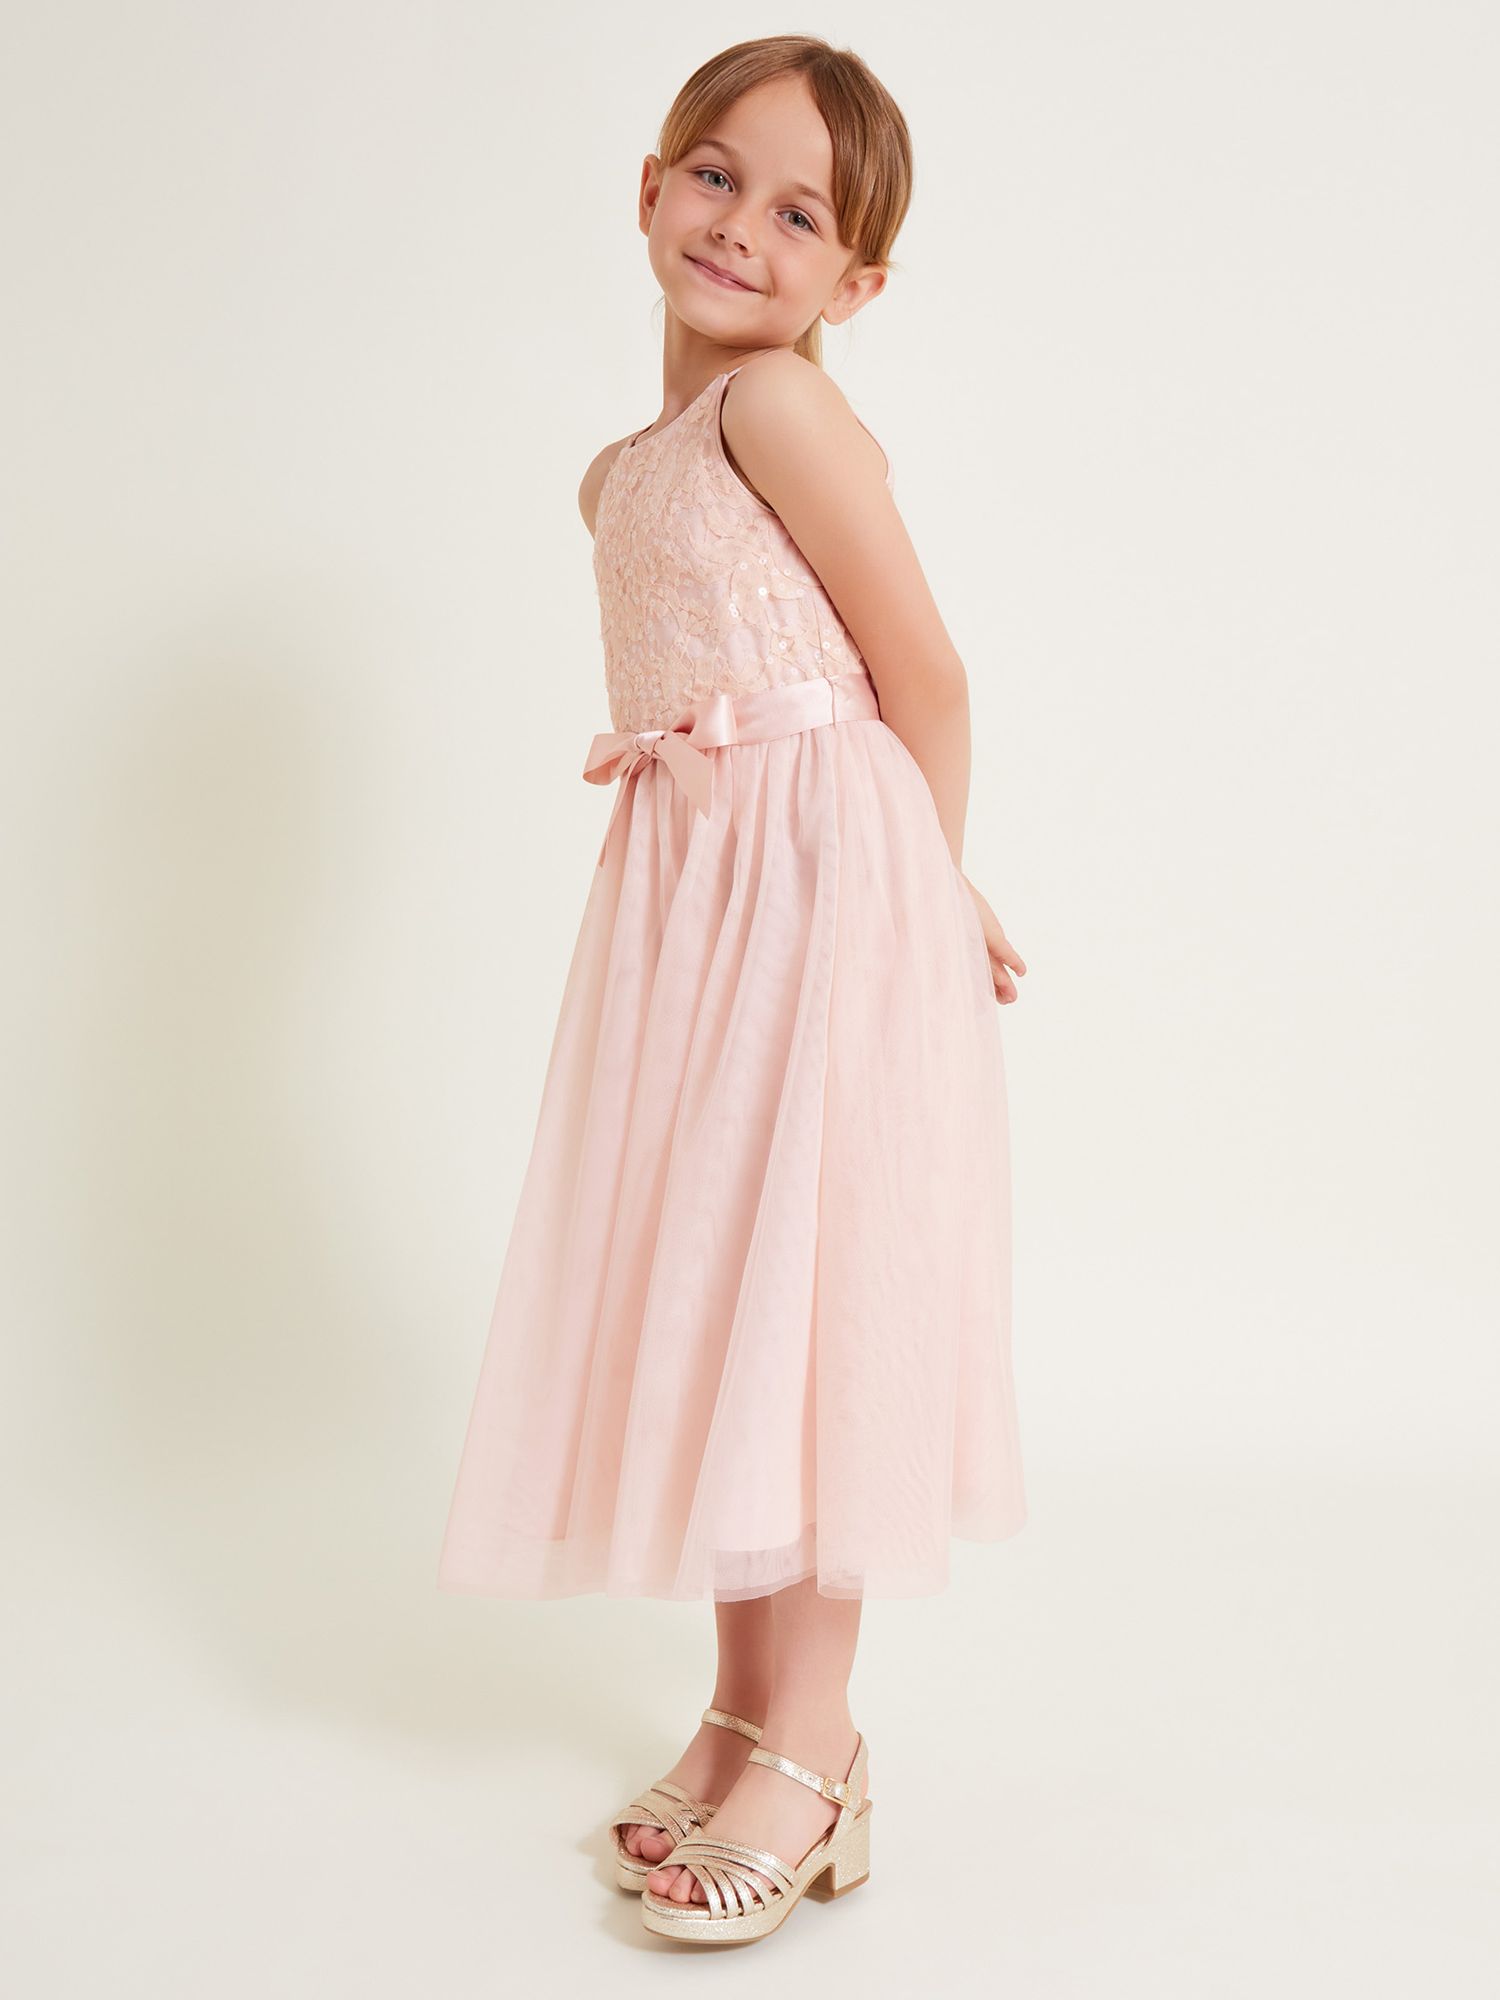 Monsoon Kids' Lacey Truth Sequin Occasion Dress, Pink, 14-15 years